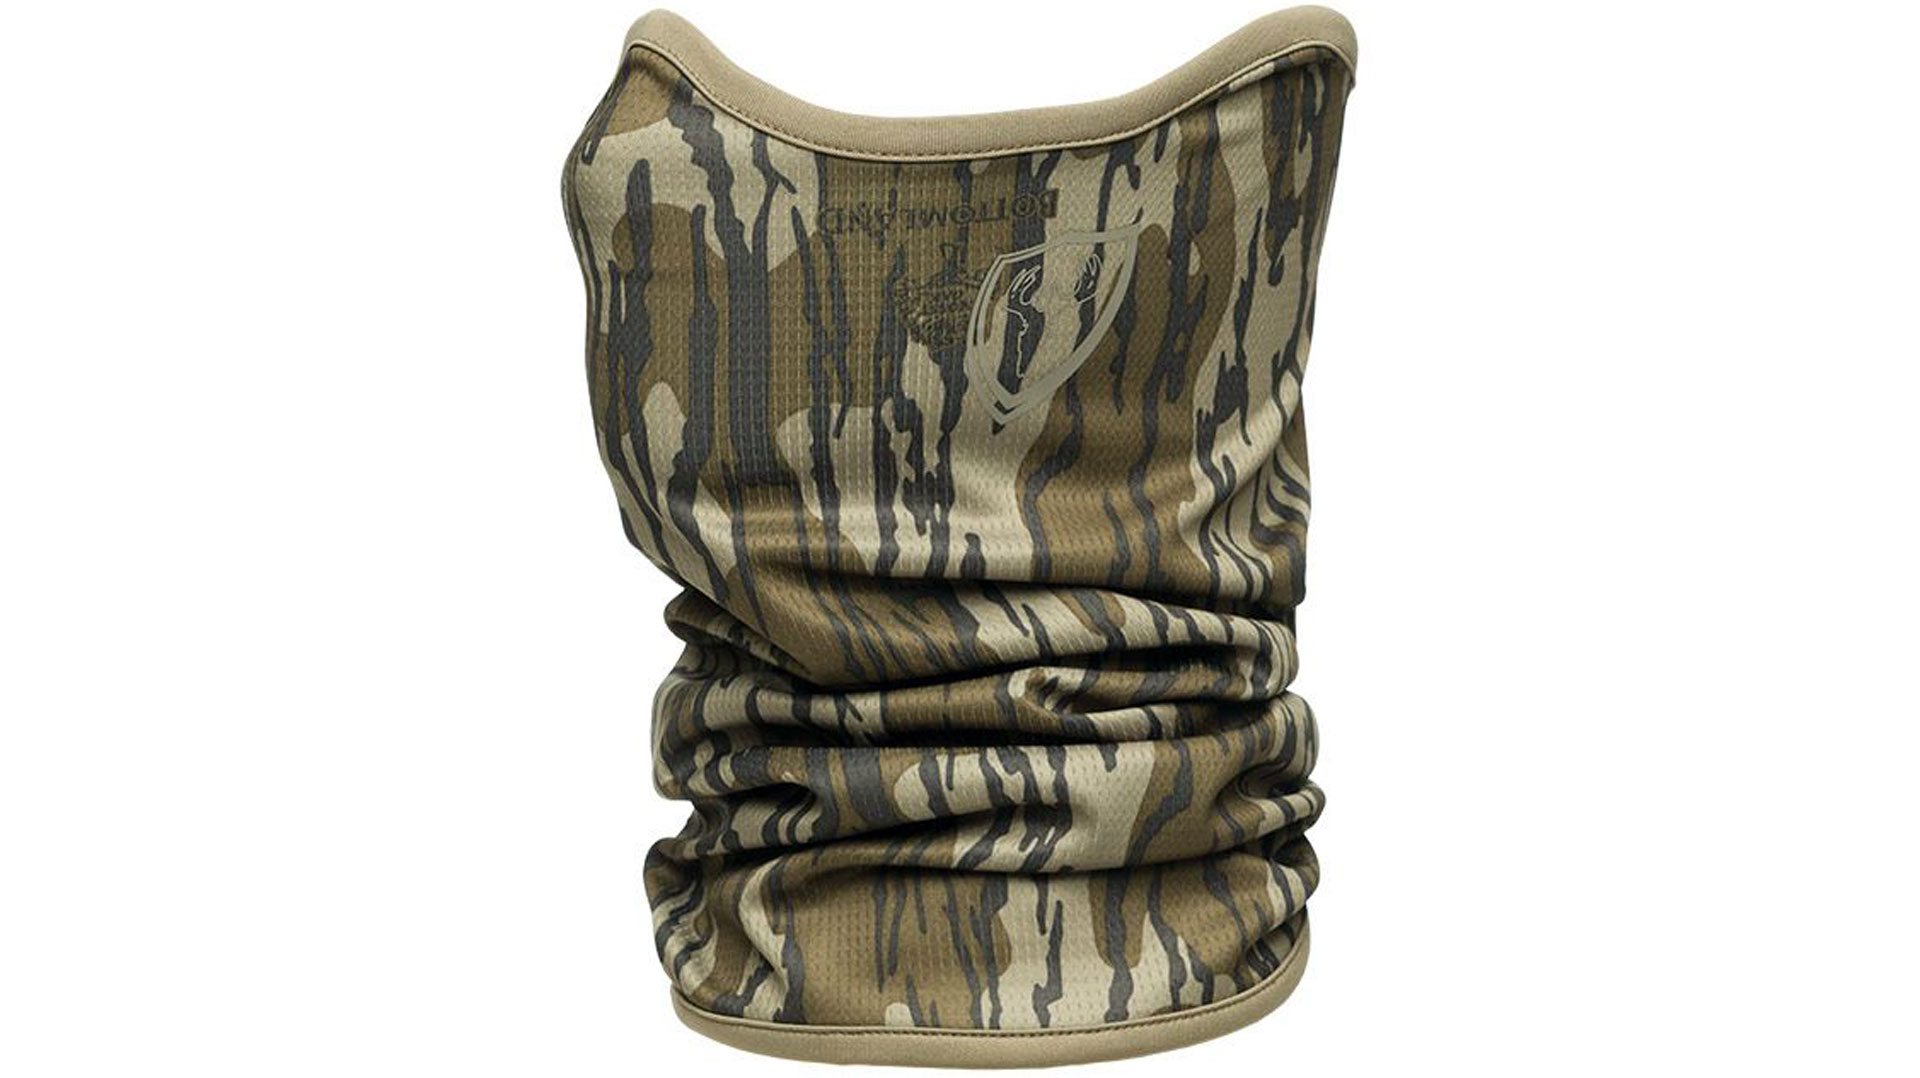 Finisher Facemask in bottomland on white